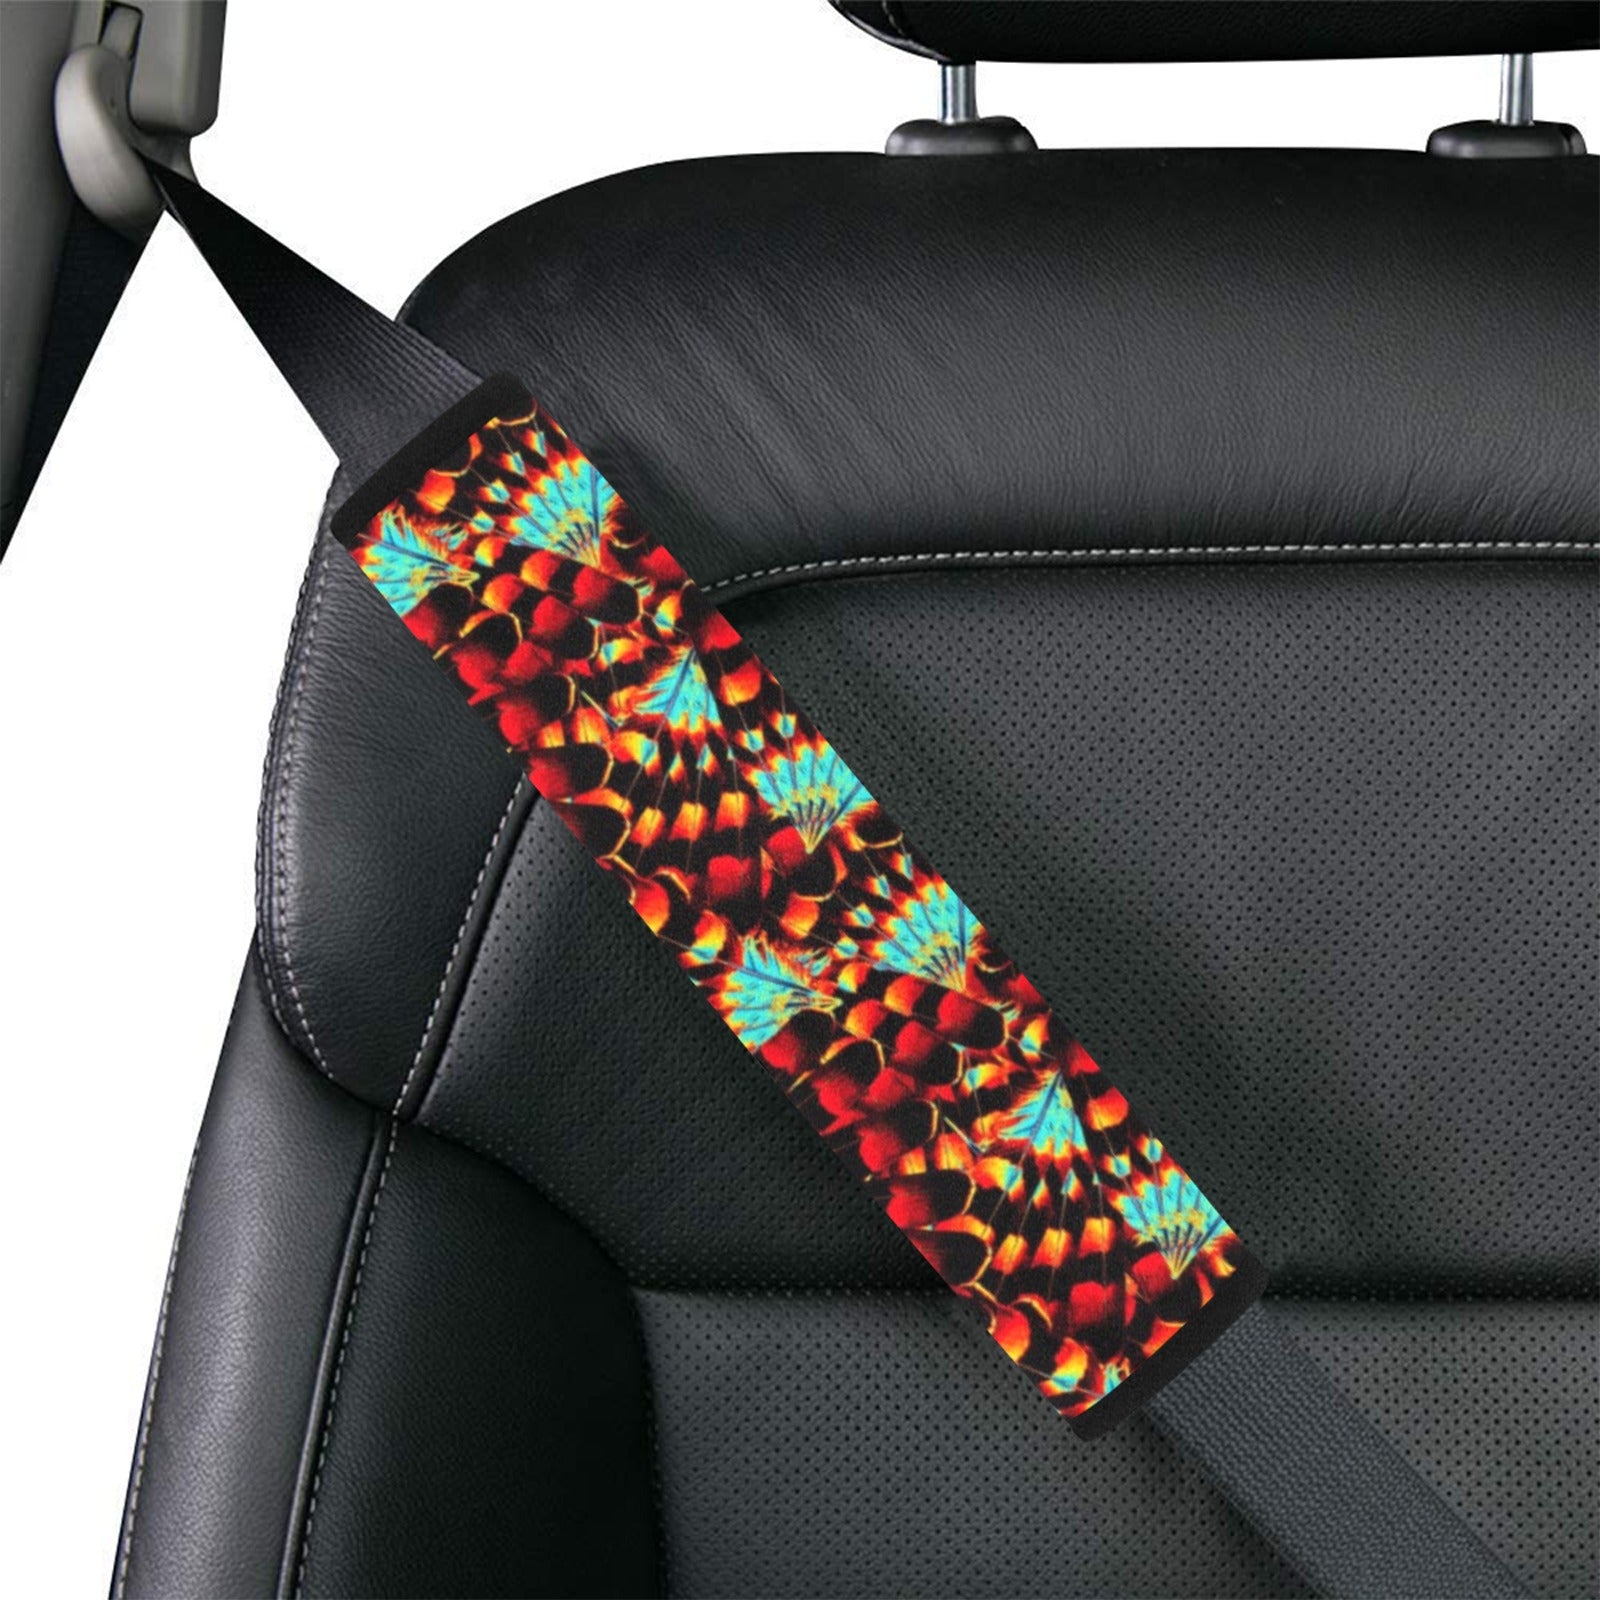 Hawk Feathers Fire and Turquoise Car Seat Belt Cover 7''x12.6'' (Pack of 2)